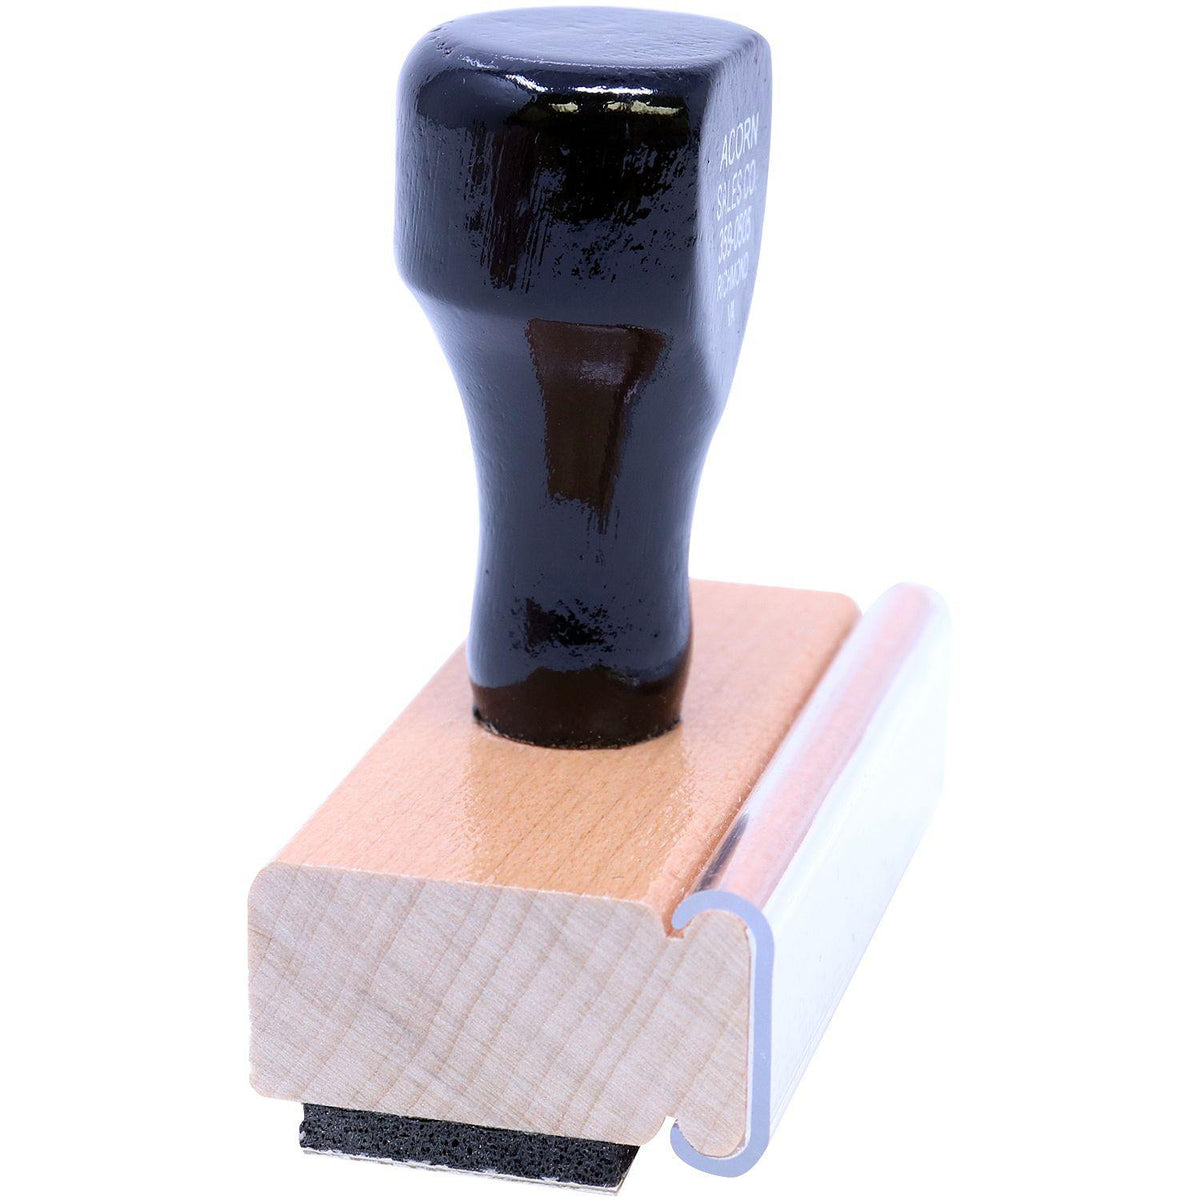 Side View of Large Package Services Rubber Stamp at an Angle